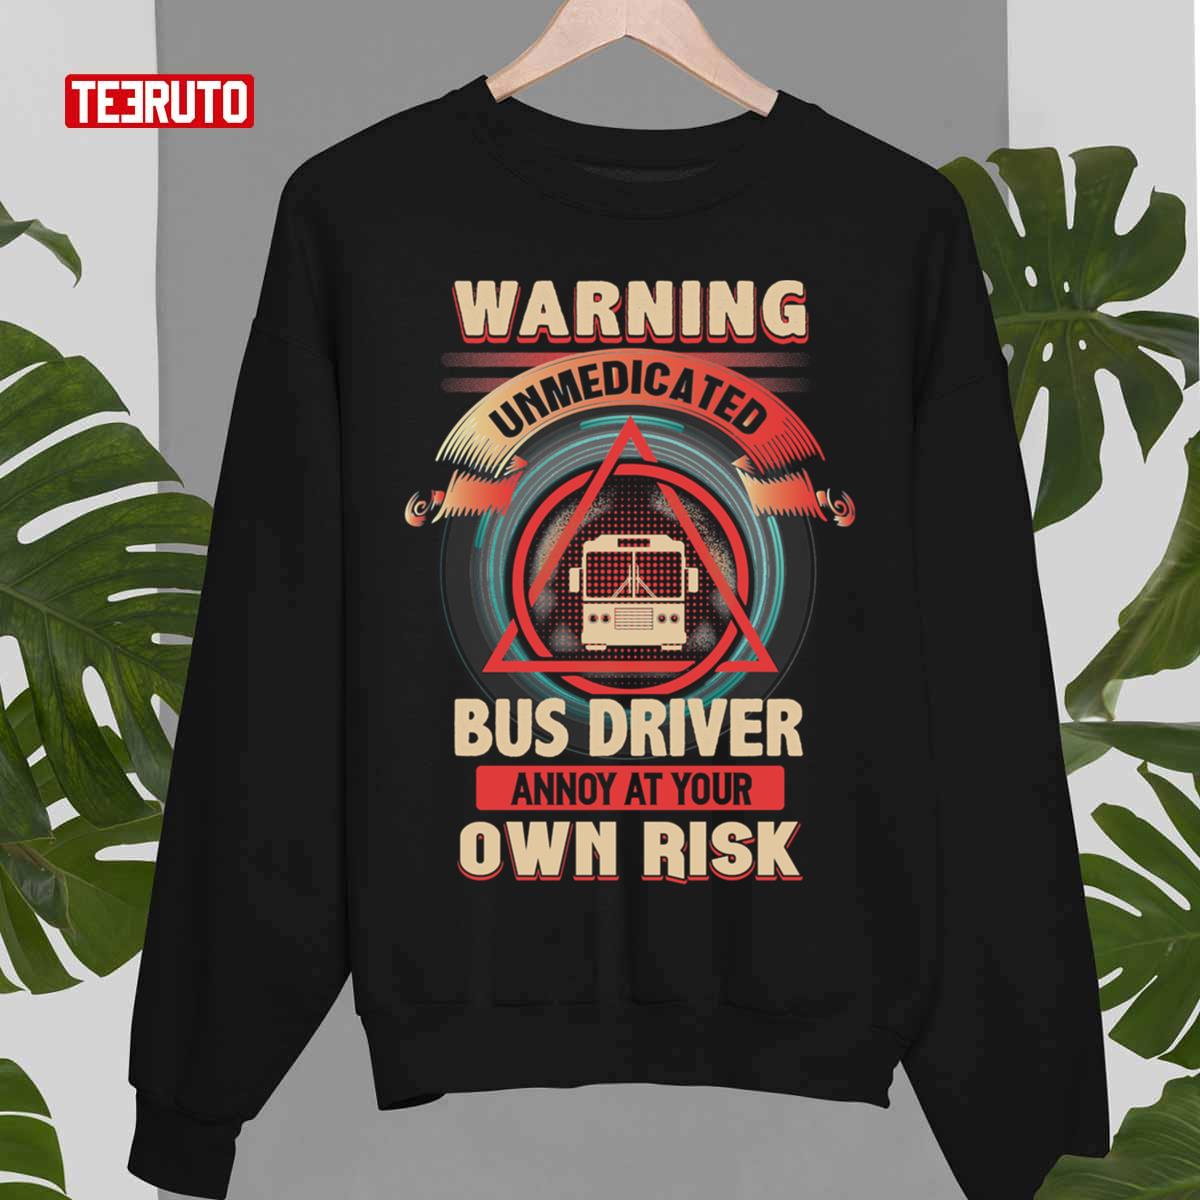 Unmedicated Bus Driver Unisex T-Shirt